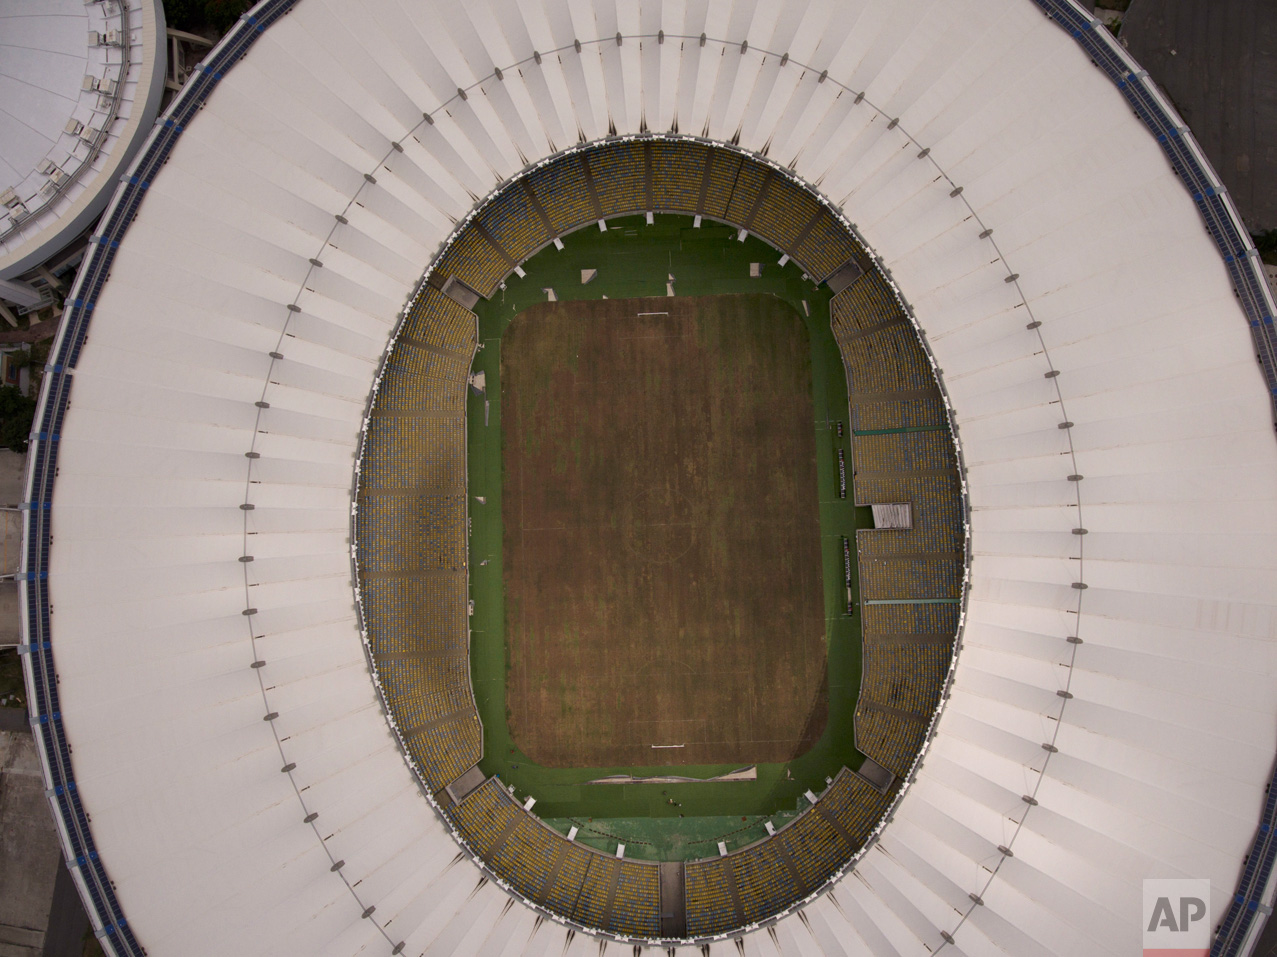 This Feb. 2, 2017 photo shows Maracana stadium's dry playing field in Rio de Janeiro, Brazil. The stadium was renovated for the 2014 World Cup at a cost of about $500 million, and largely abandoned after the Olympics and Paralympics, then hit by vandals who ripped out thousands of seats and stole televisions. (AP Photo/Mario Lobao)